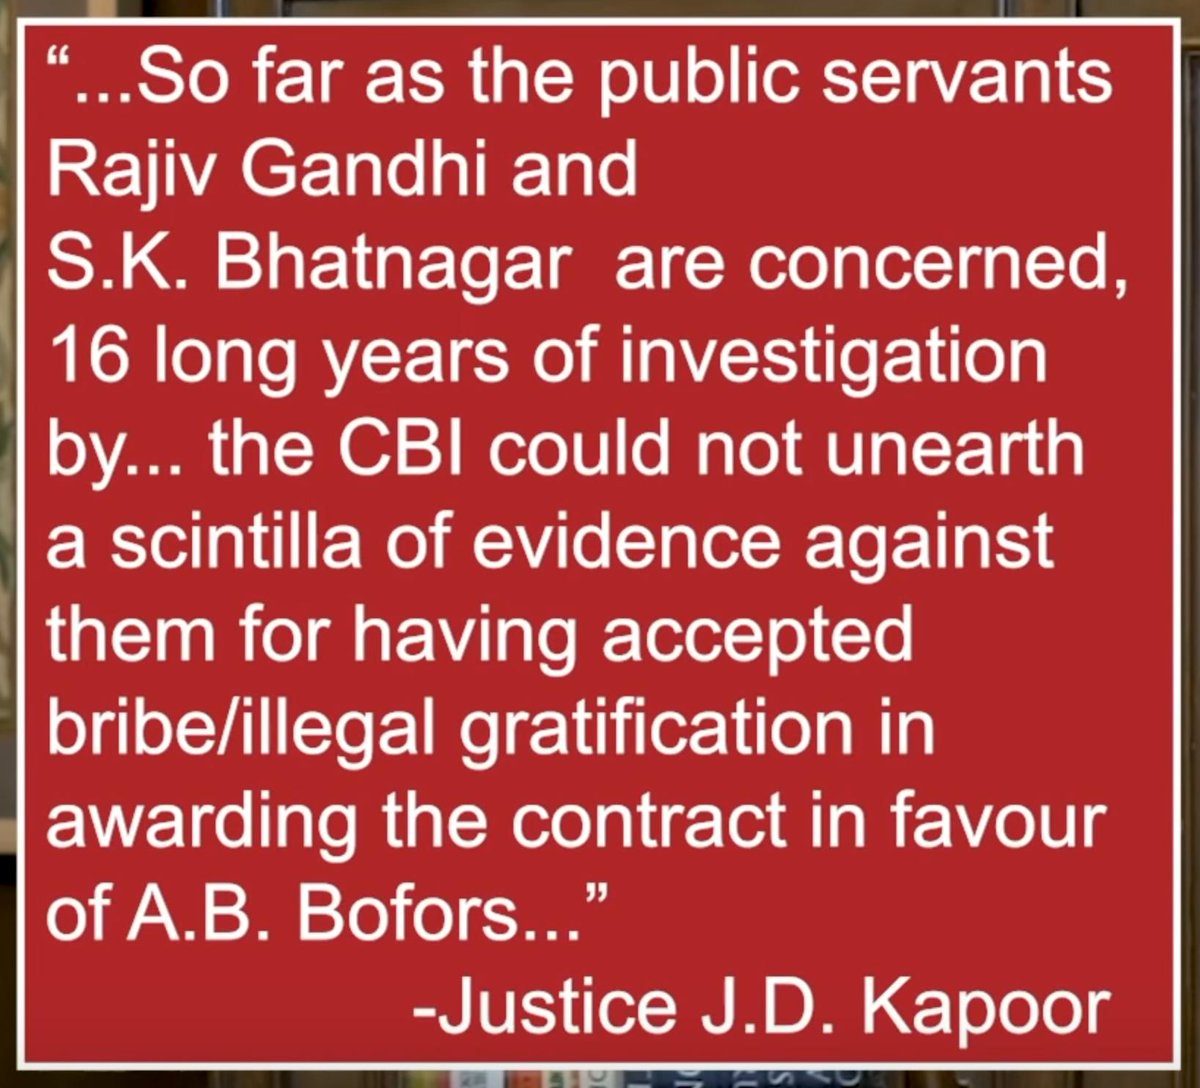 Vajpayee govt ordered a CBI probe into Bofors in 1999. And in February 2004, Justice JD Kapoor of the Delhi HC quashed all the charges of bribery against Rajiv Gandhi and others.Later in 2005, the Supreme Court upheld the verdict.